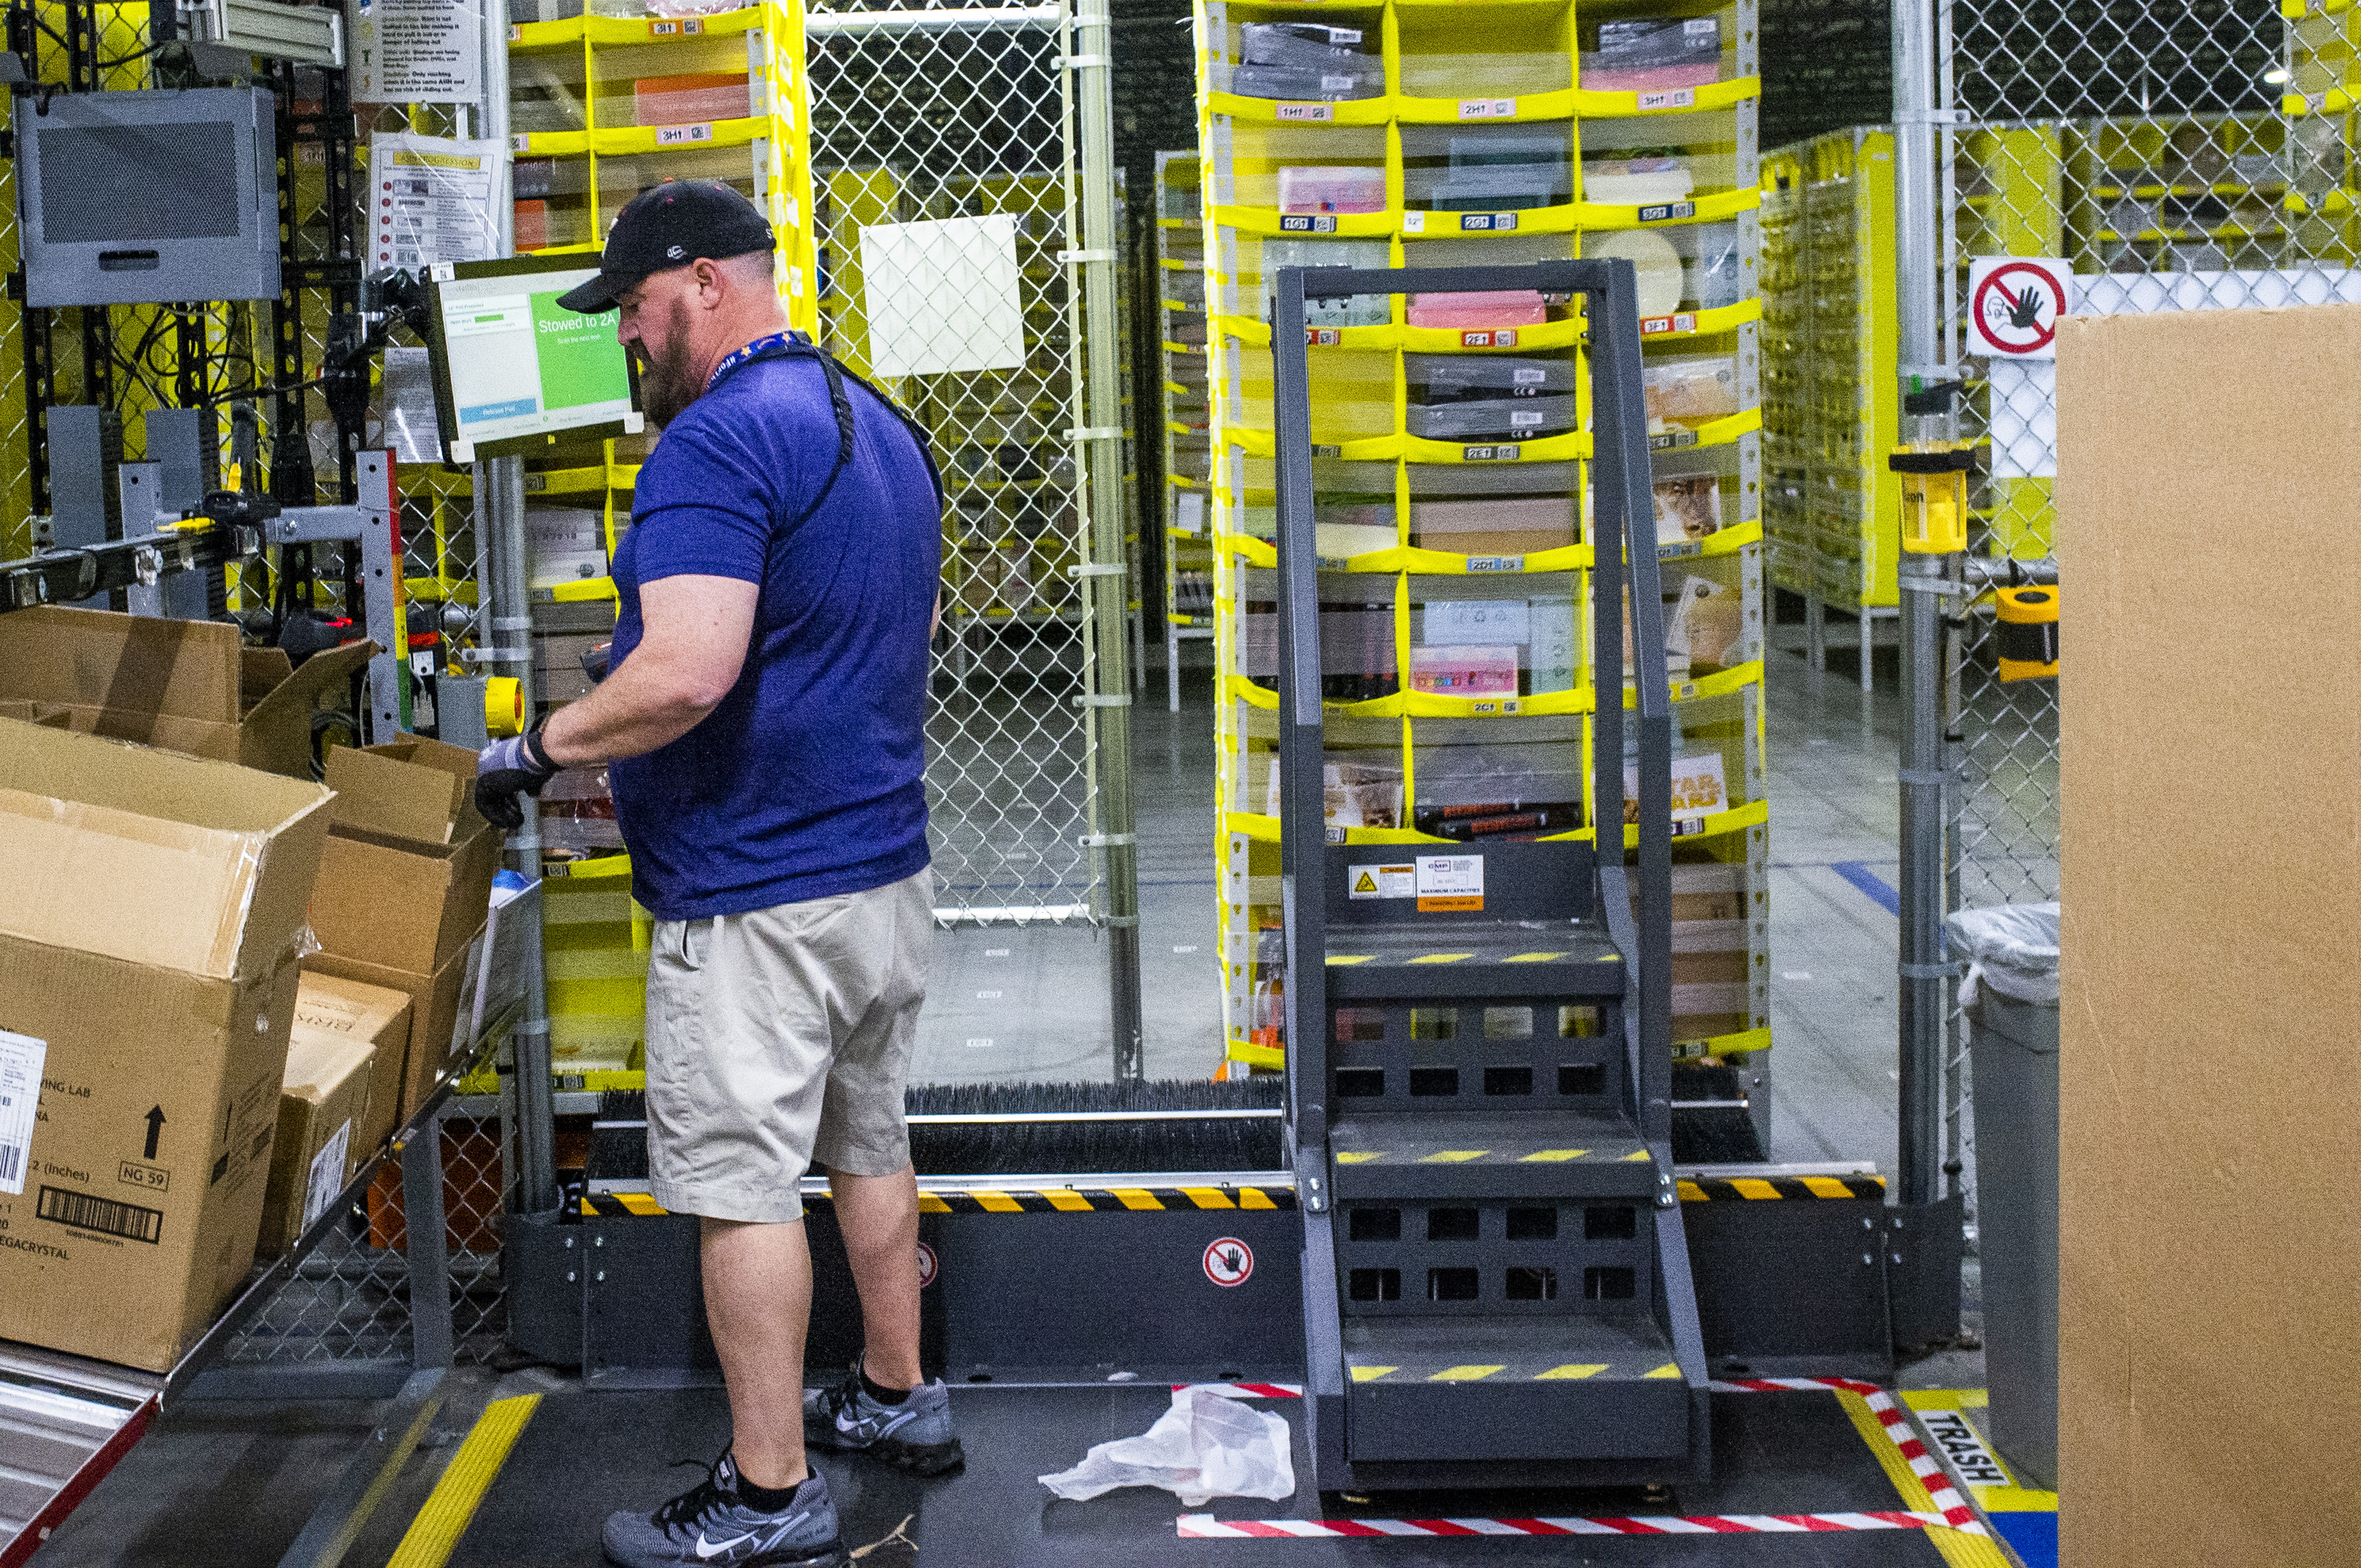 A New  Warehouse Would Bring Jobs, but for How Long?